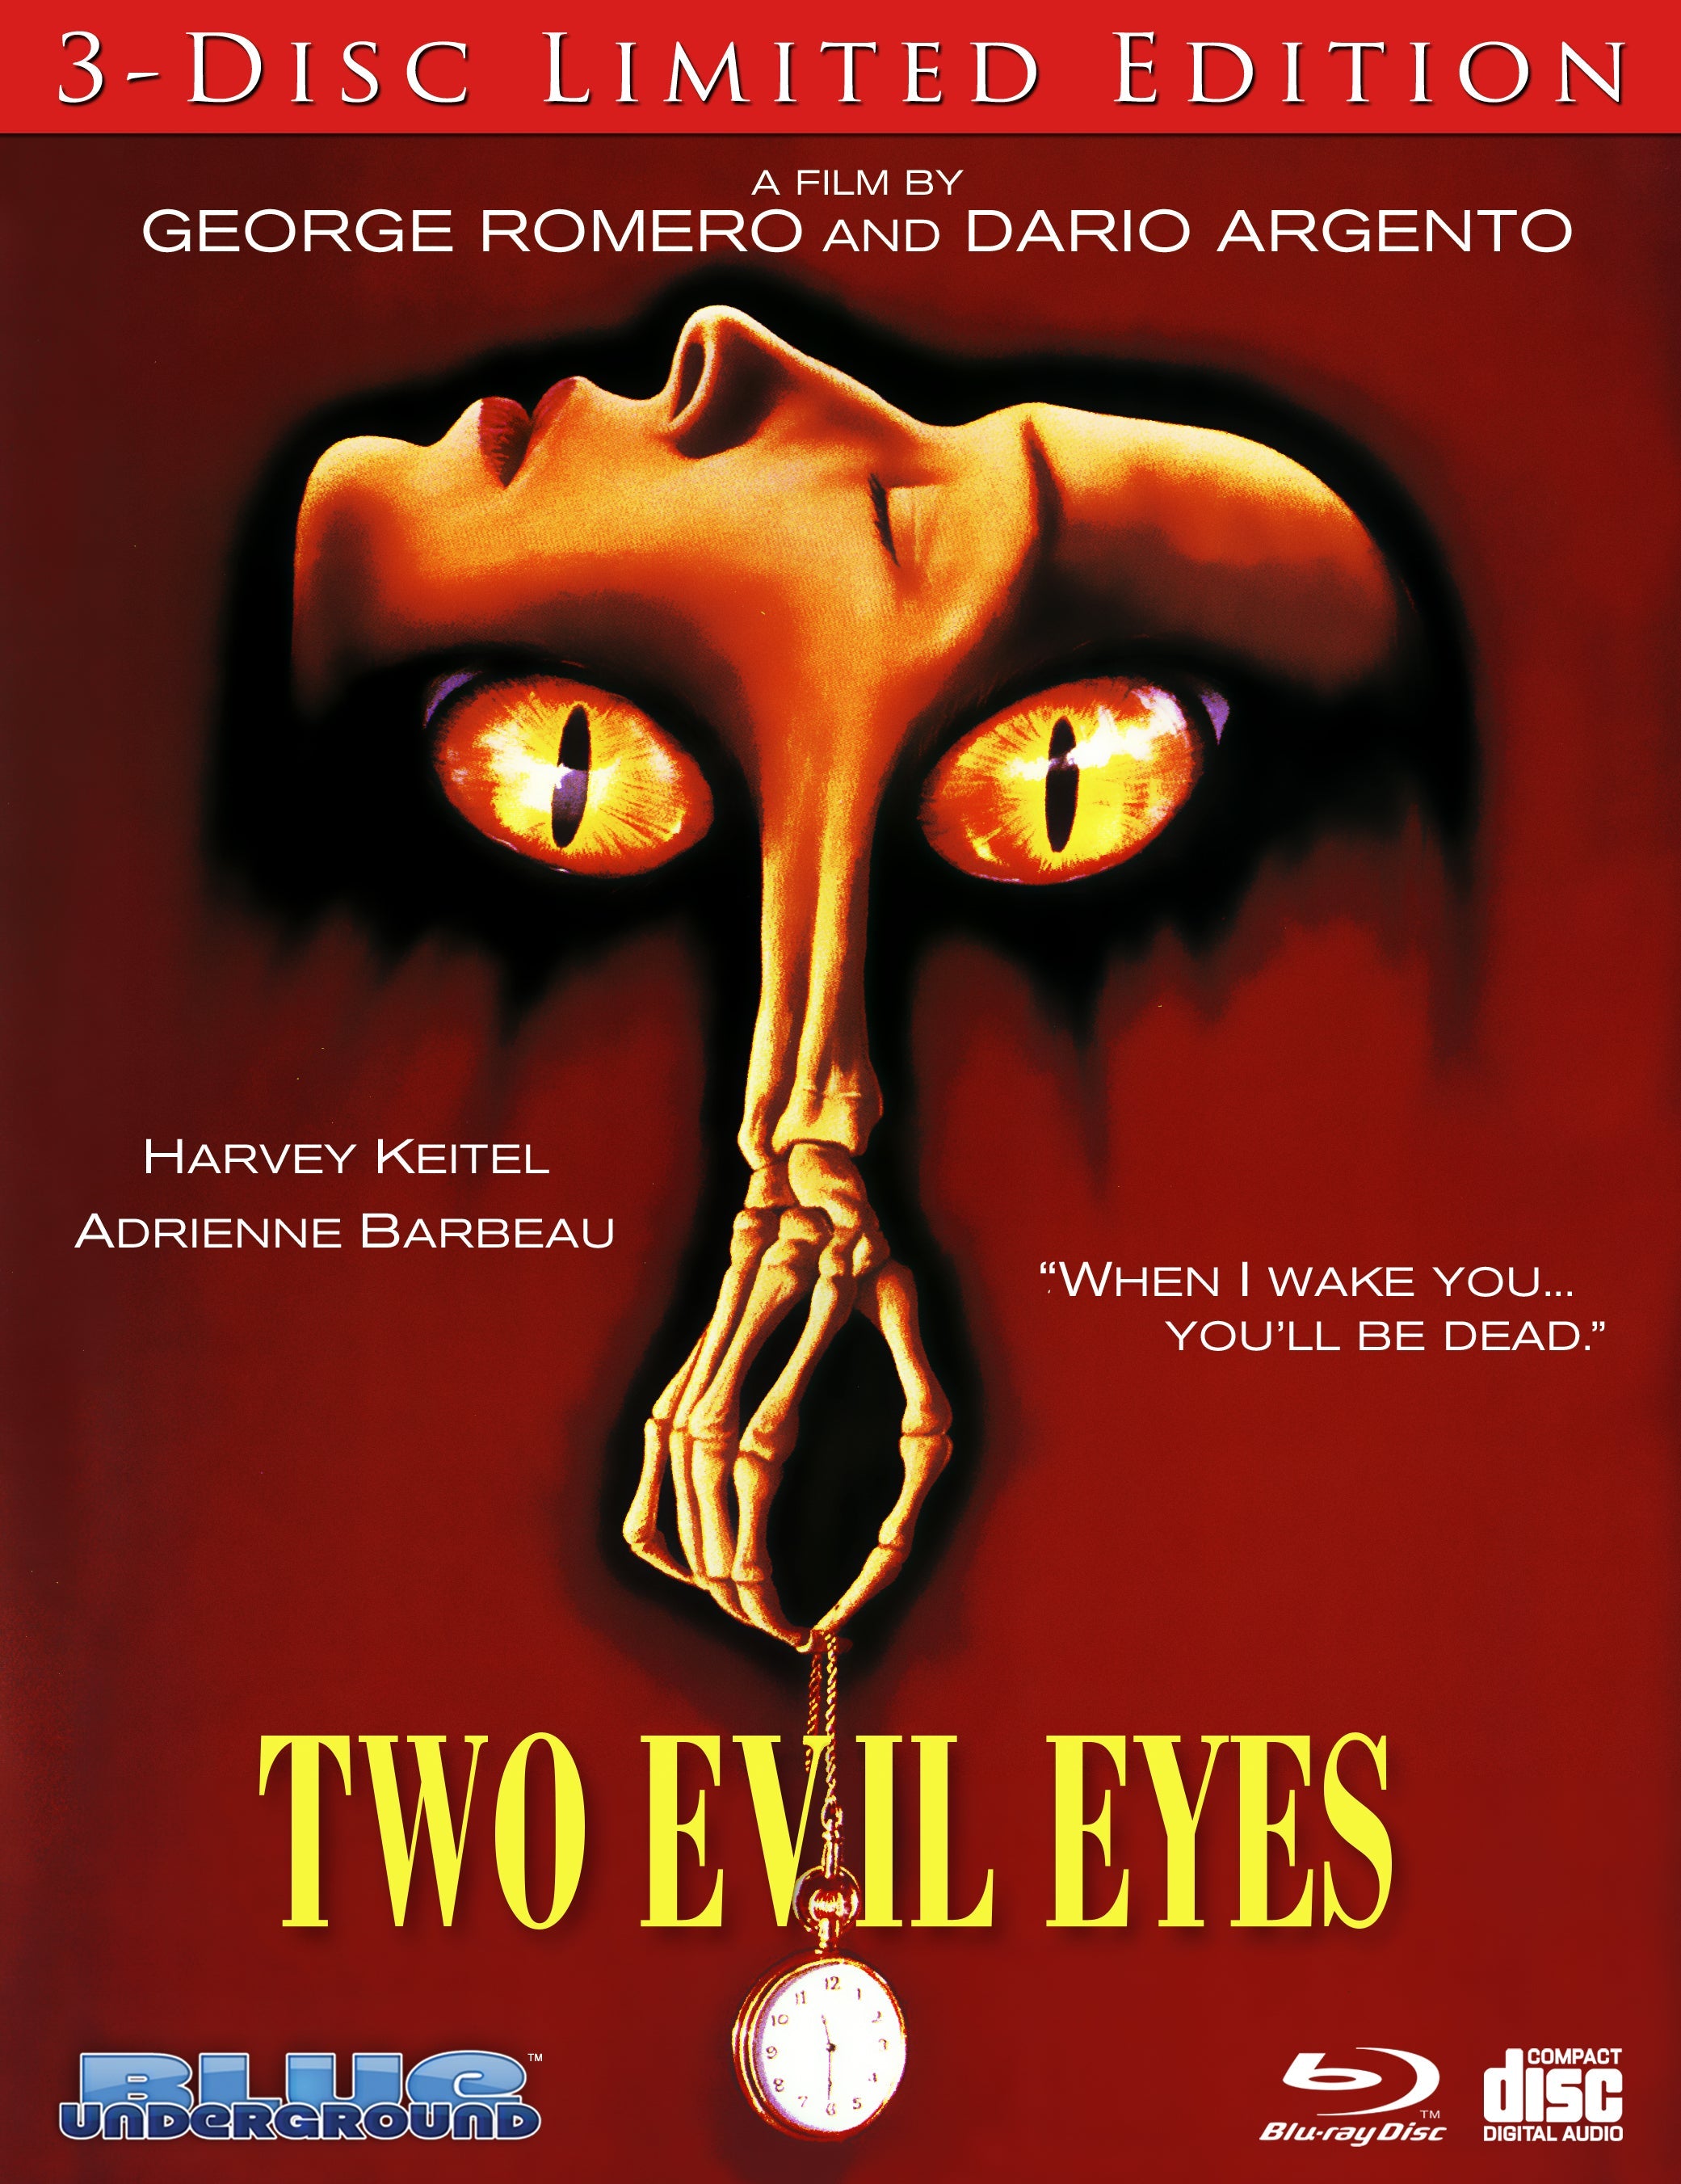 Two Evil Eyes (Limited Edition) Blu-Ray/cd Blu-Ray